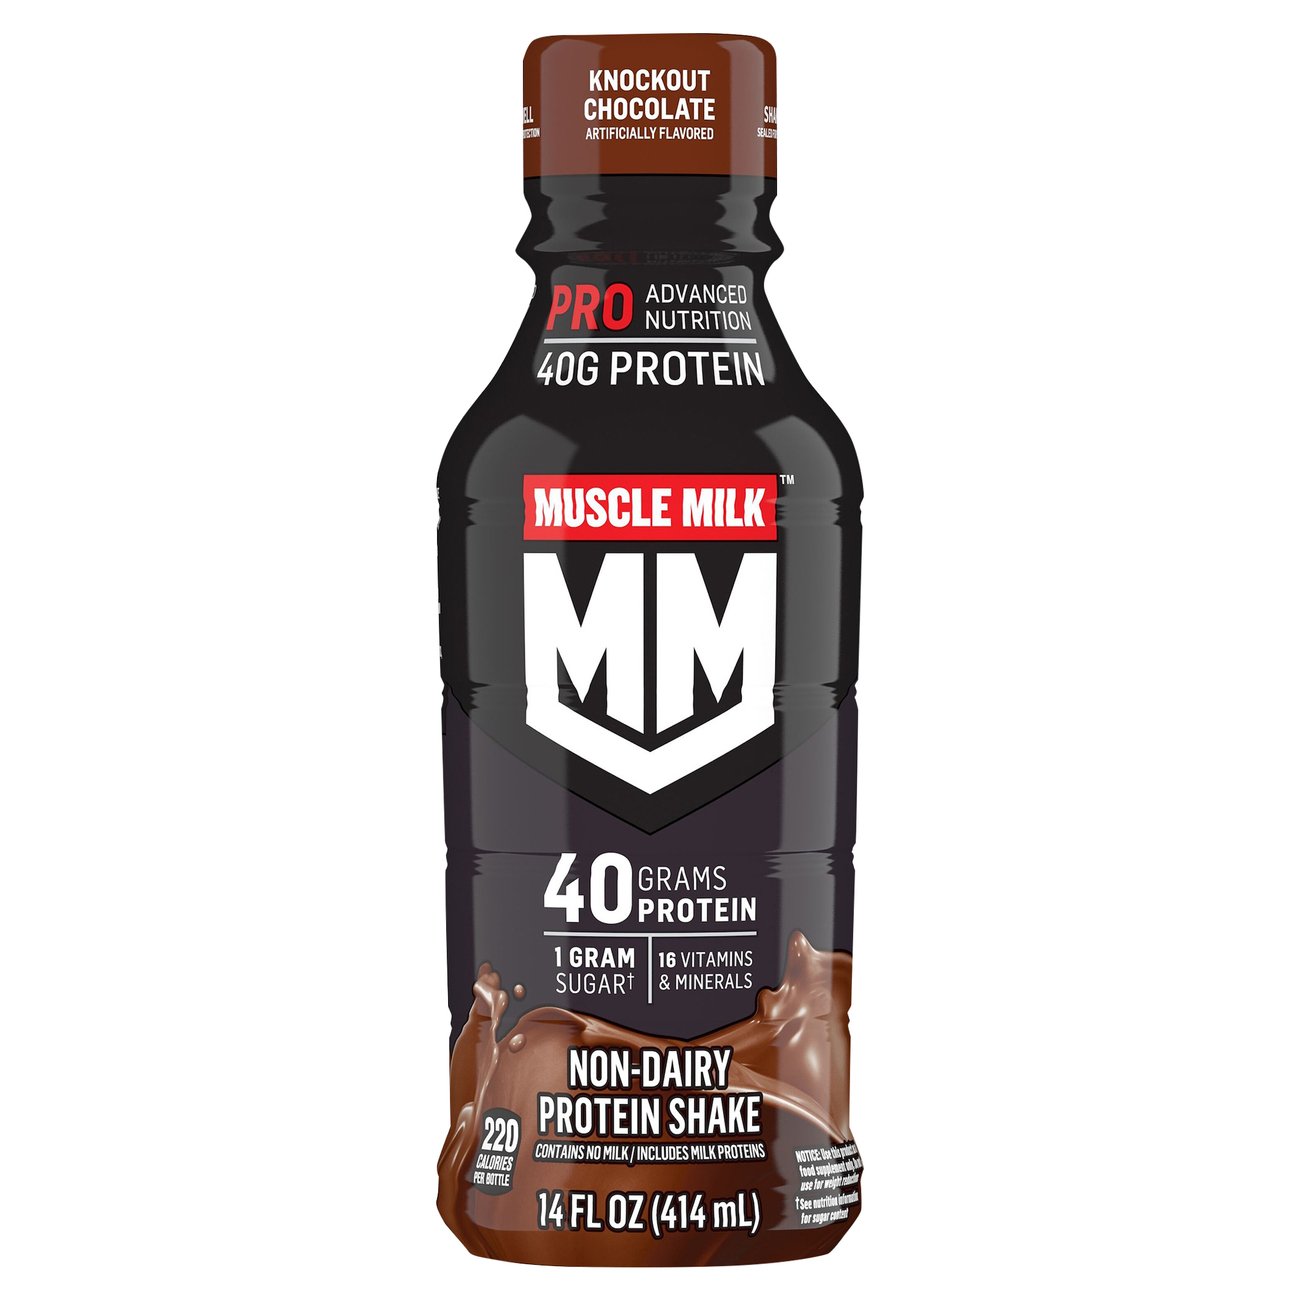 Muscle Milk Pro Series Protein Shake 40g Knockout Chocolate Shop